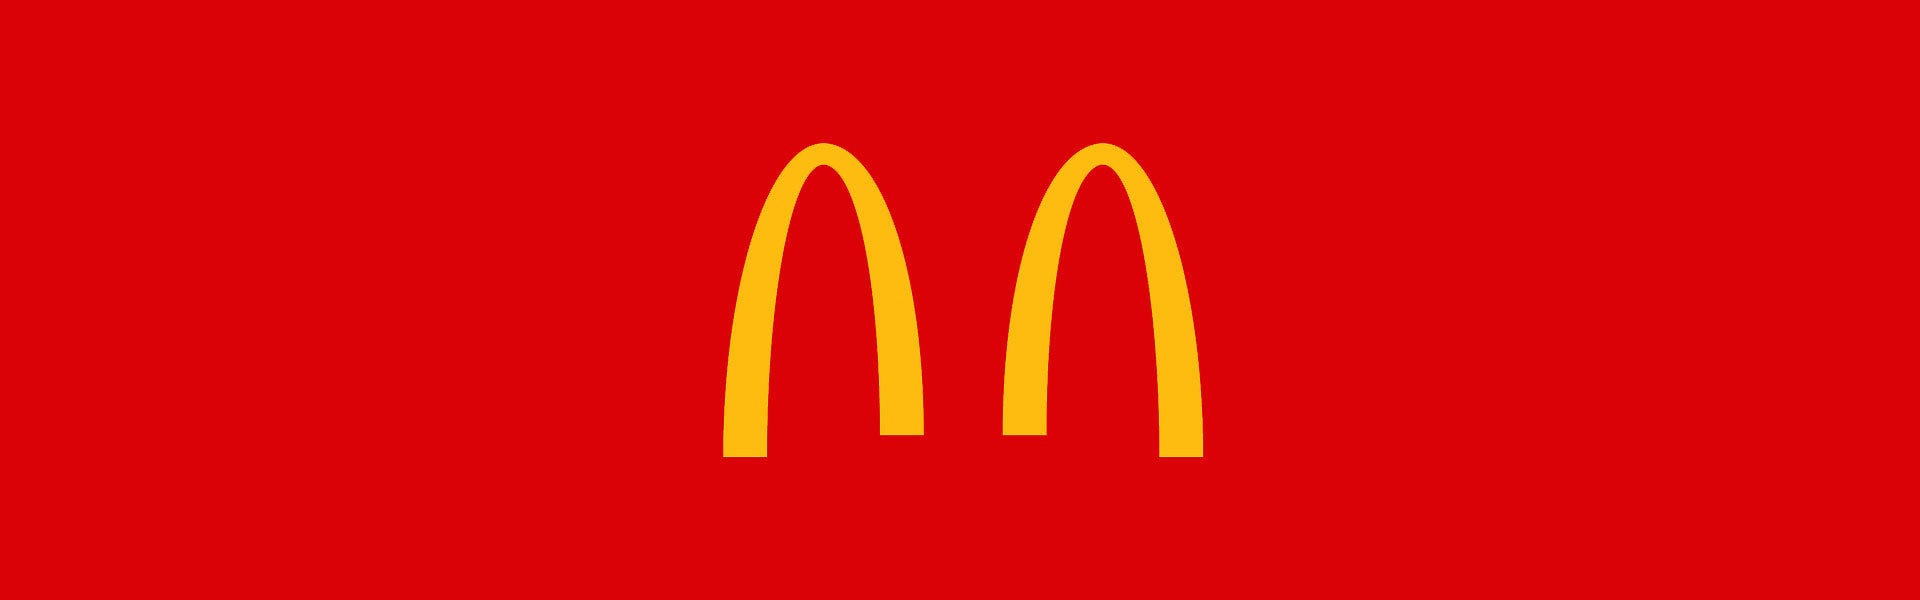 McDonald's Reimagines Its Logo For Our New Covid 19 Reality